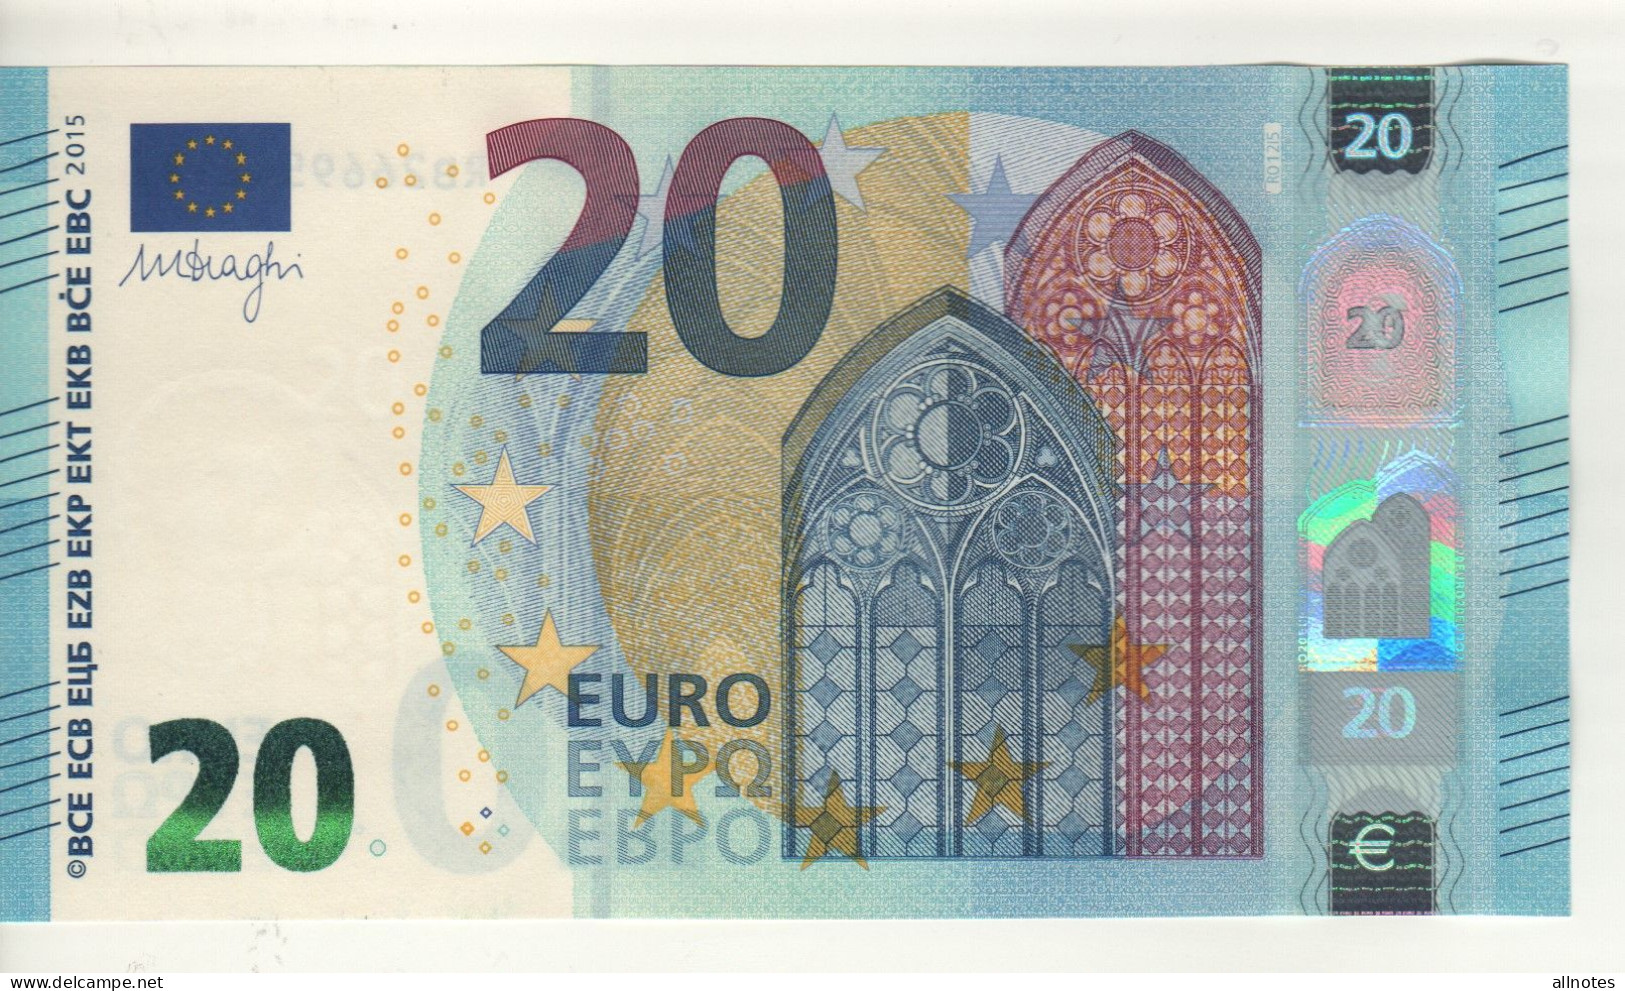 20 EURO  Firma  Draghi    R 012 I5   RB2669542187   /  FDS - UNC - 20 Euro